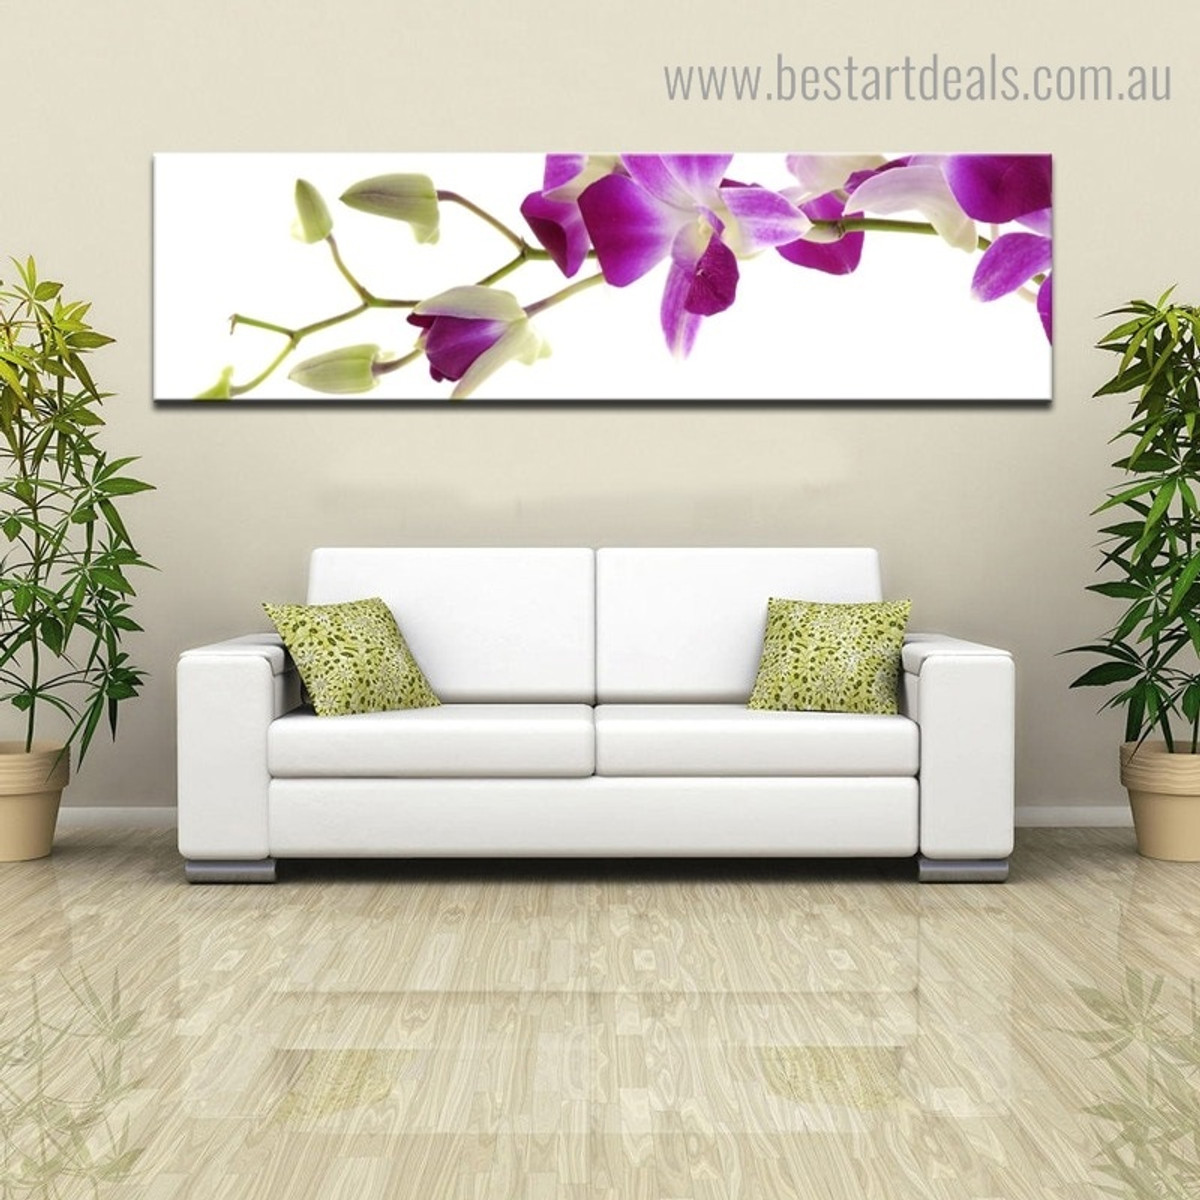 Purple Shade Blooms Floral Panoramic Framed Painting Pic Canvas Print for Room Wall Finery